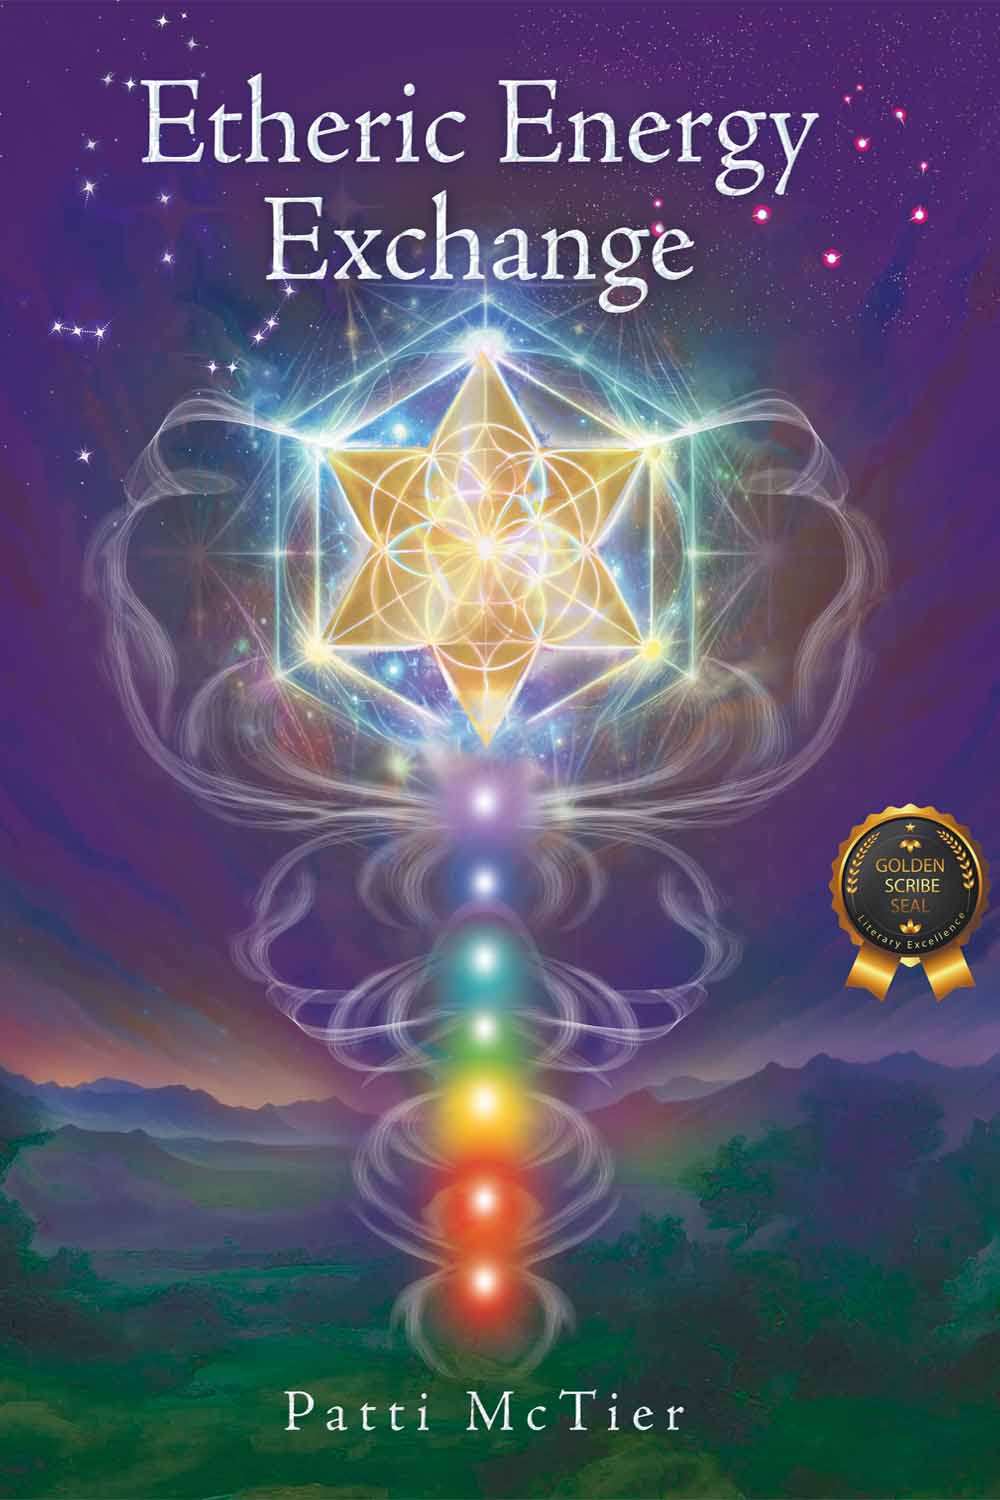 Etheric Energy Exchange by Patti McTier